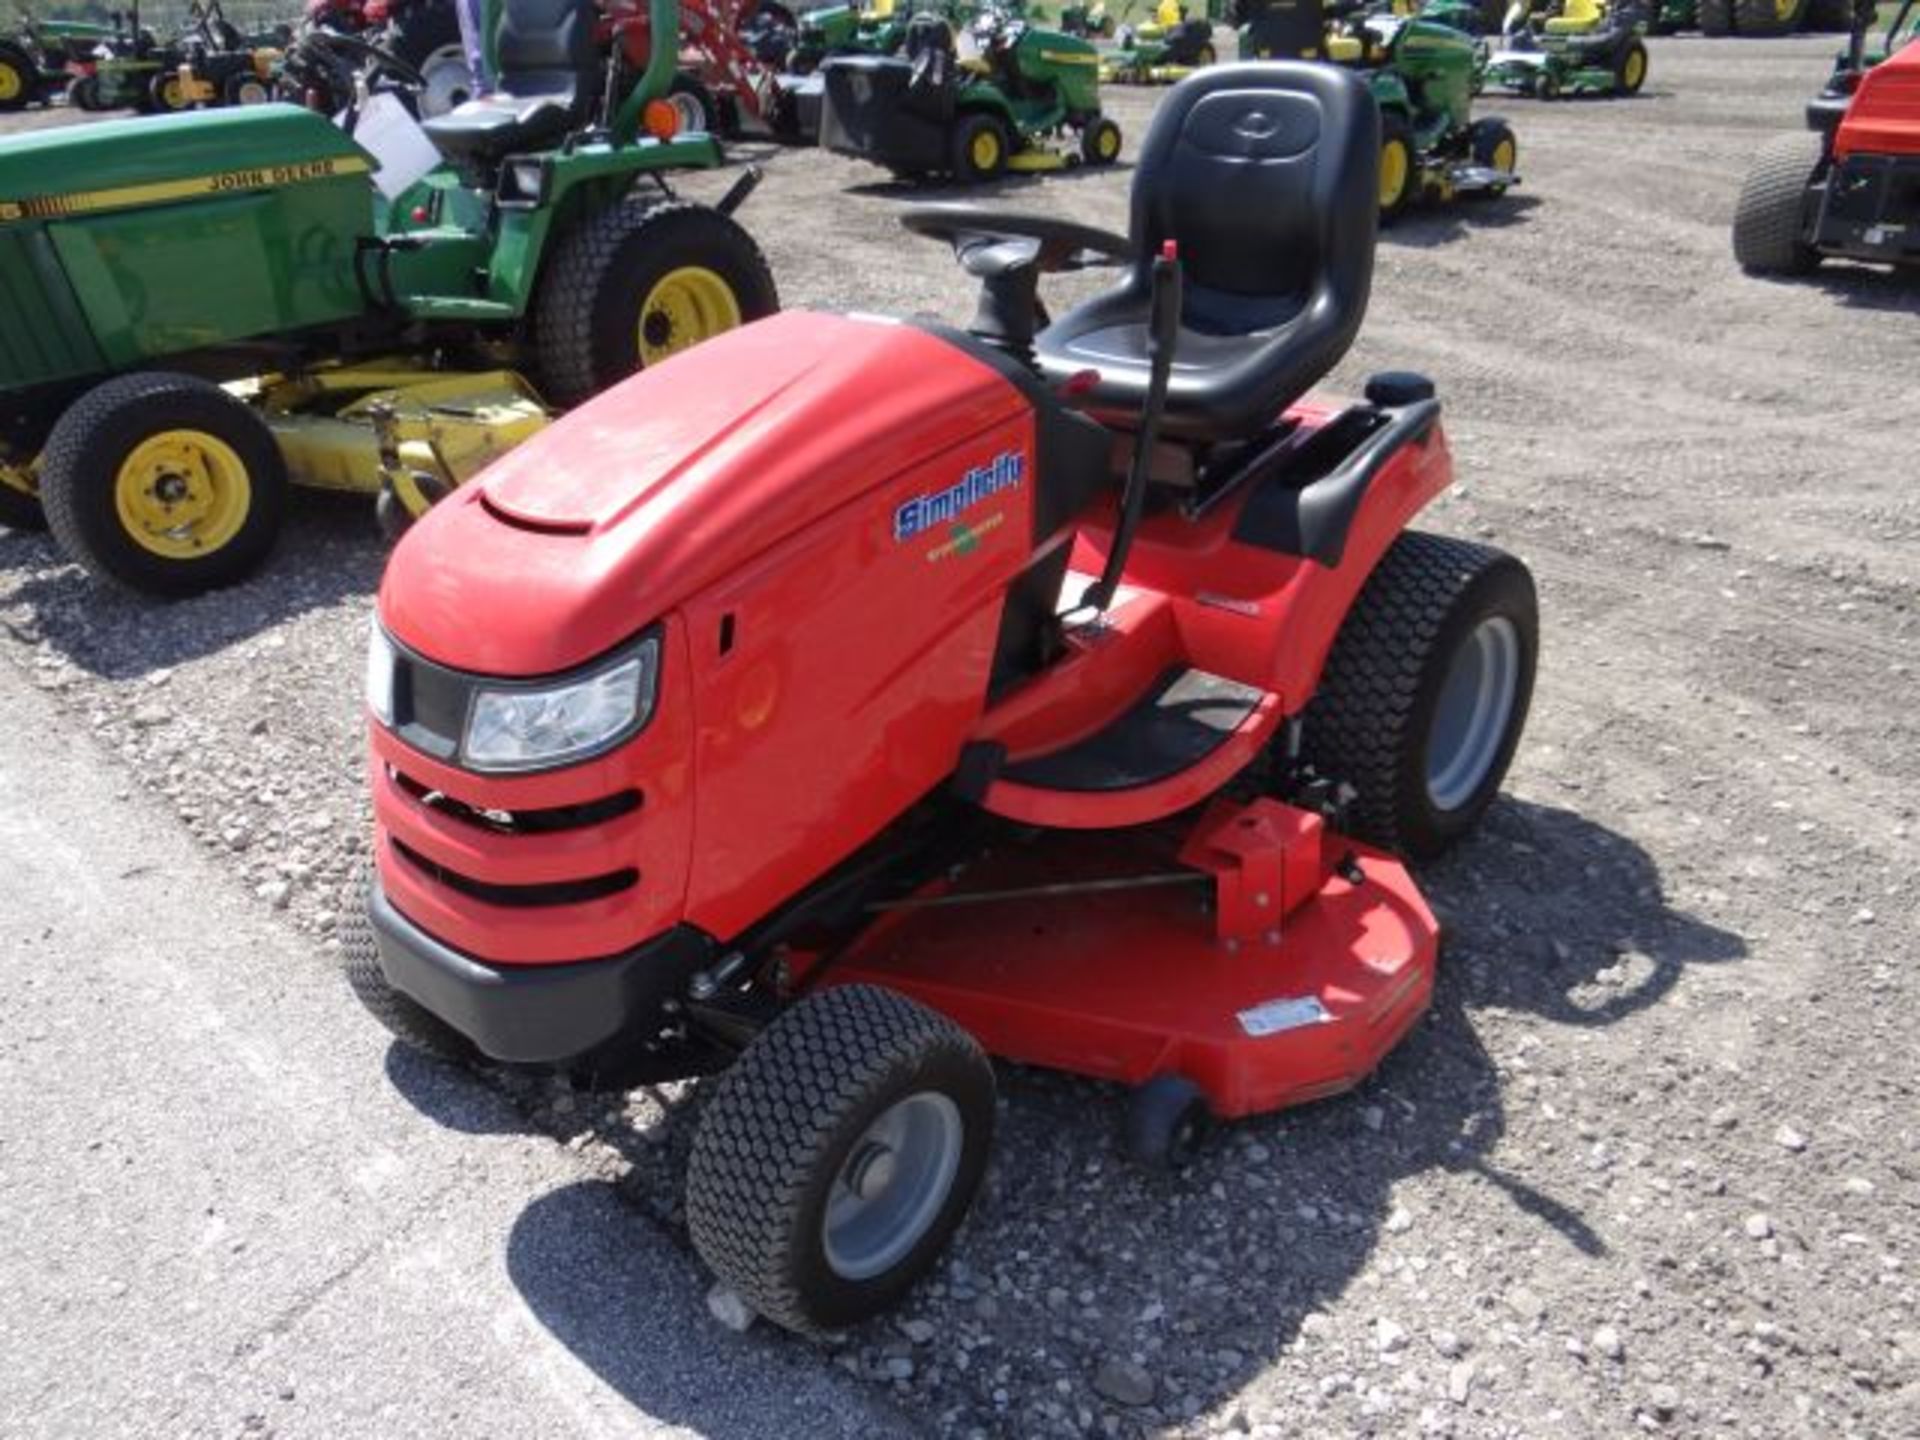 2013 Simplicity Broadmoor 27 Mower 135 hrs, 27hp, Briggs, Air Cooled, Hydro, 52" Deck, Rear - Image 2 of 4